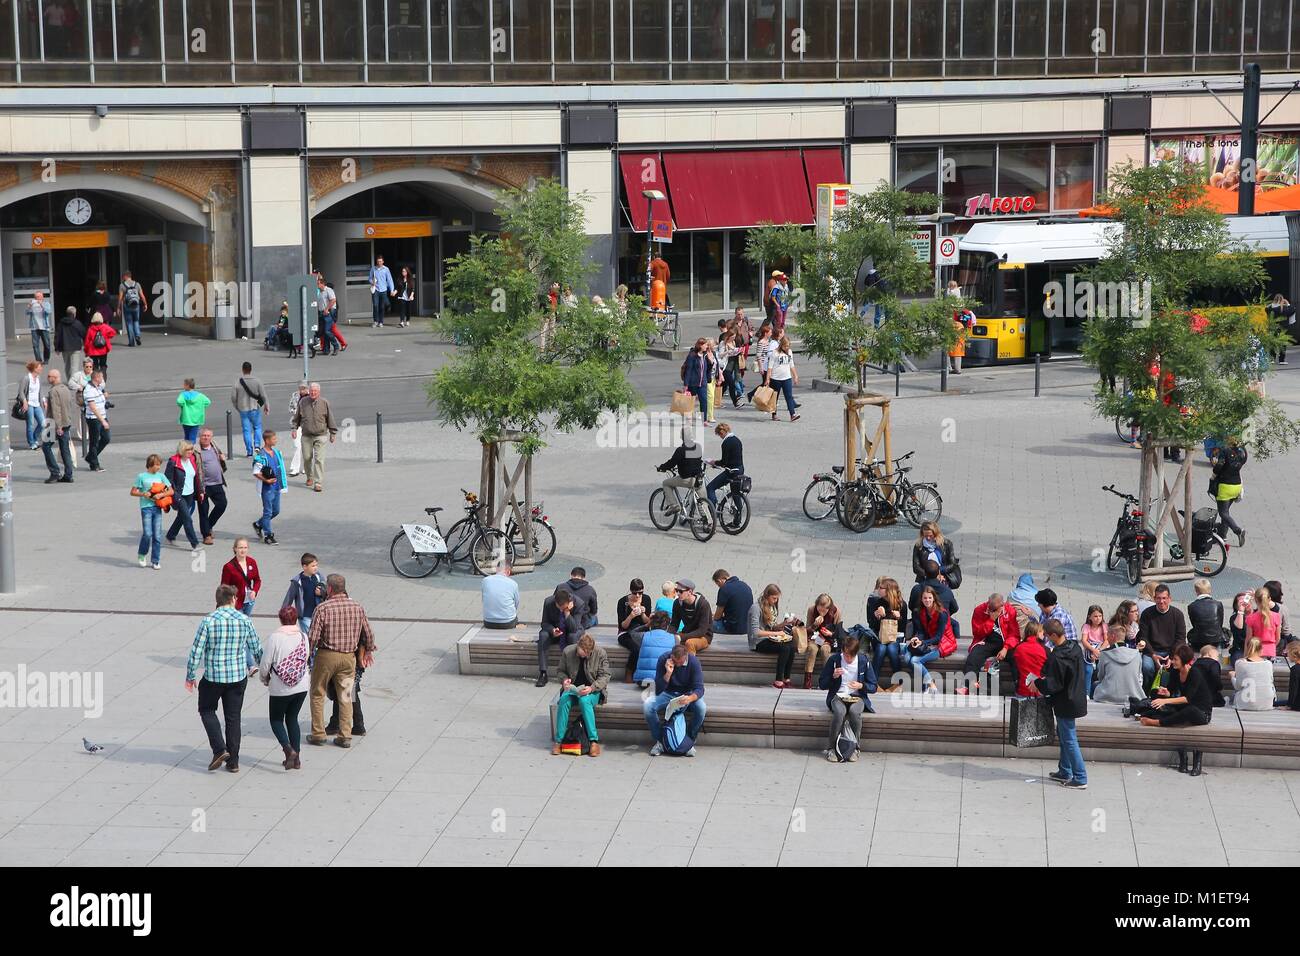 BERLIN, GERMANY - AUGUST 26, 2014: People visit famous Alexander Square (Alexanderplatz) in Berlin. Berlin is Germany's largest city with population o Stock Photo